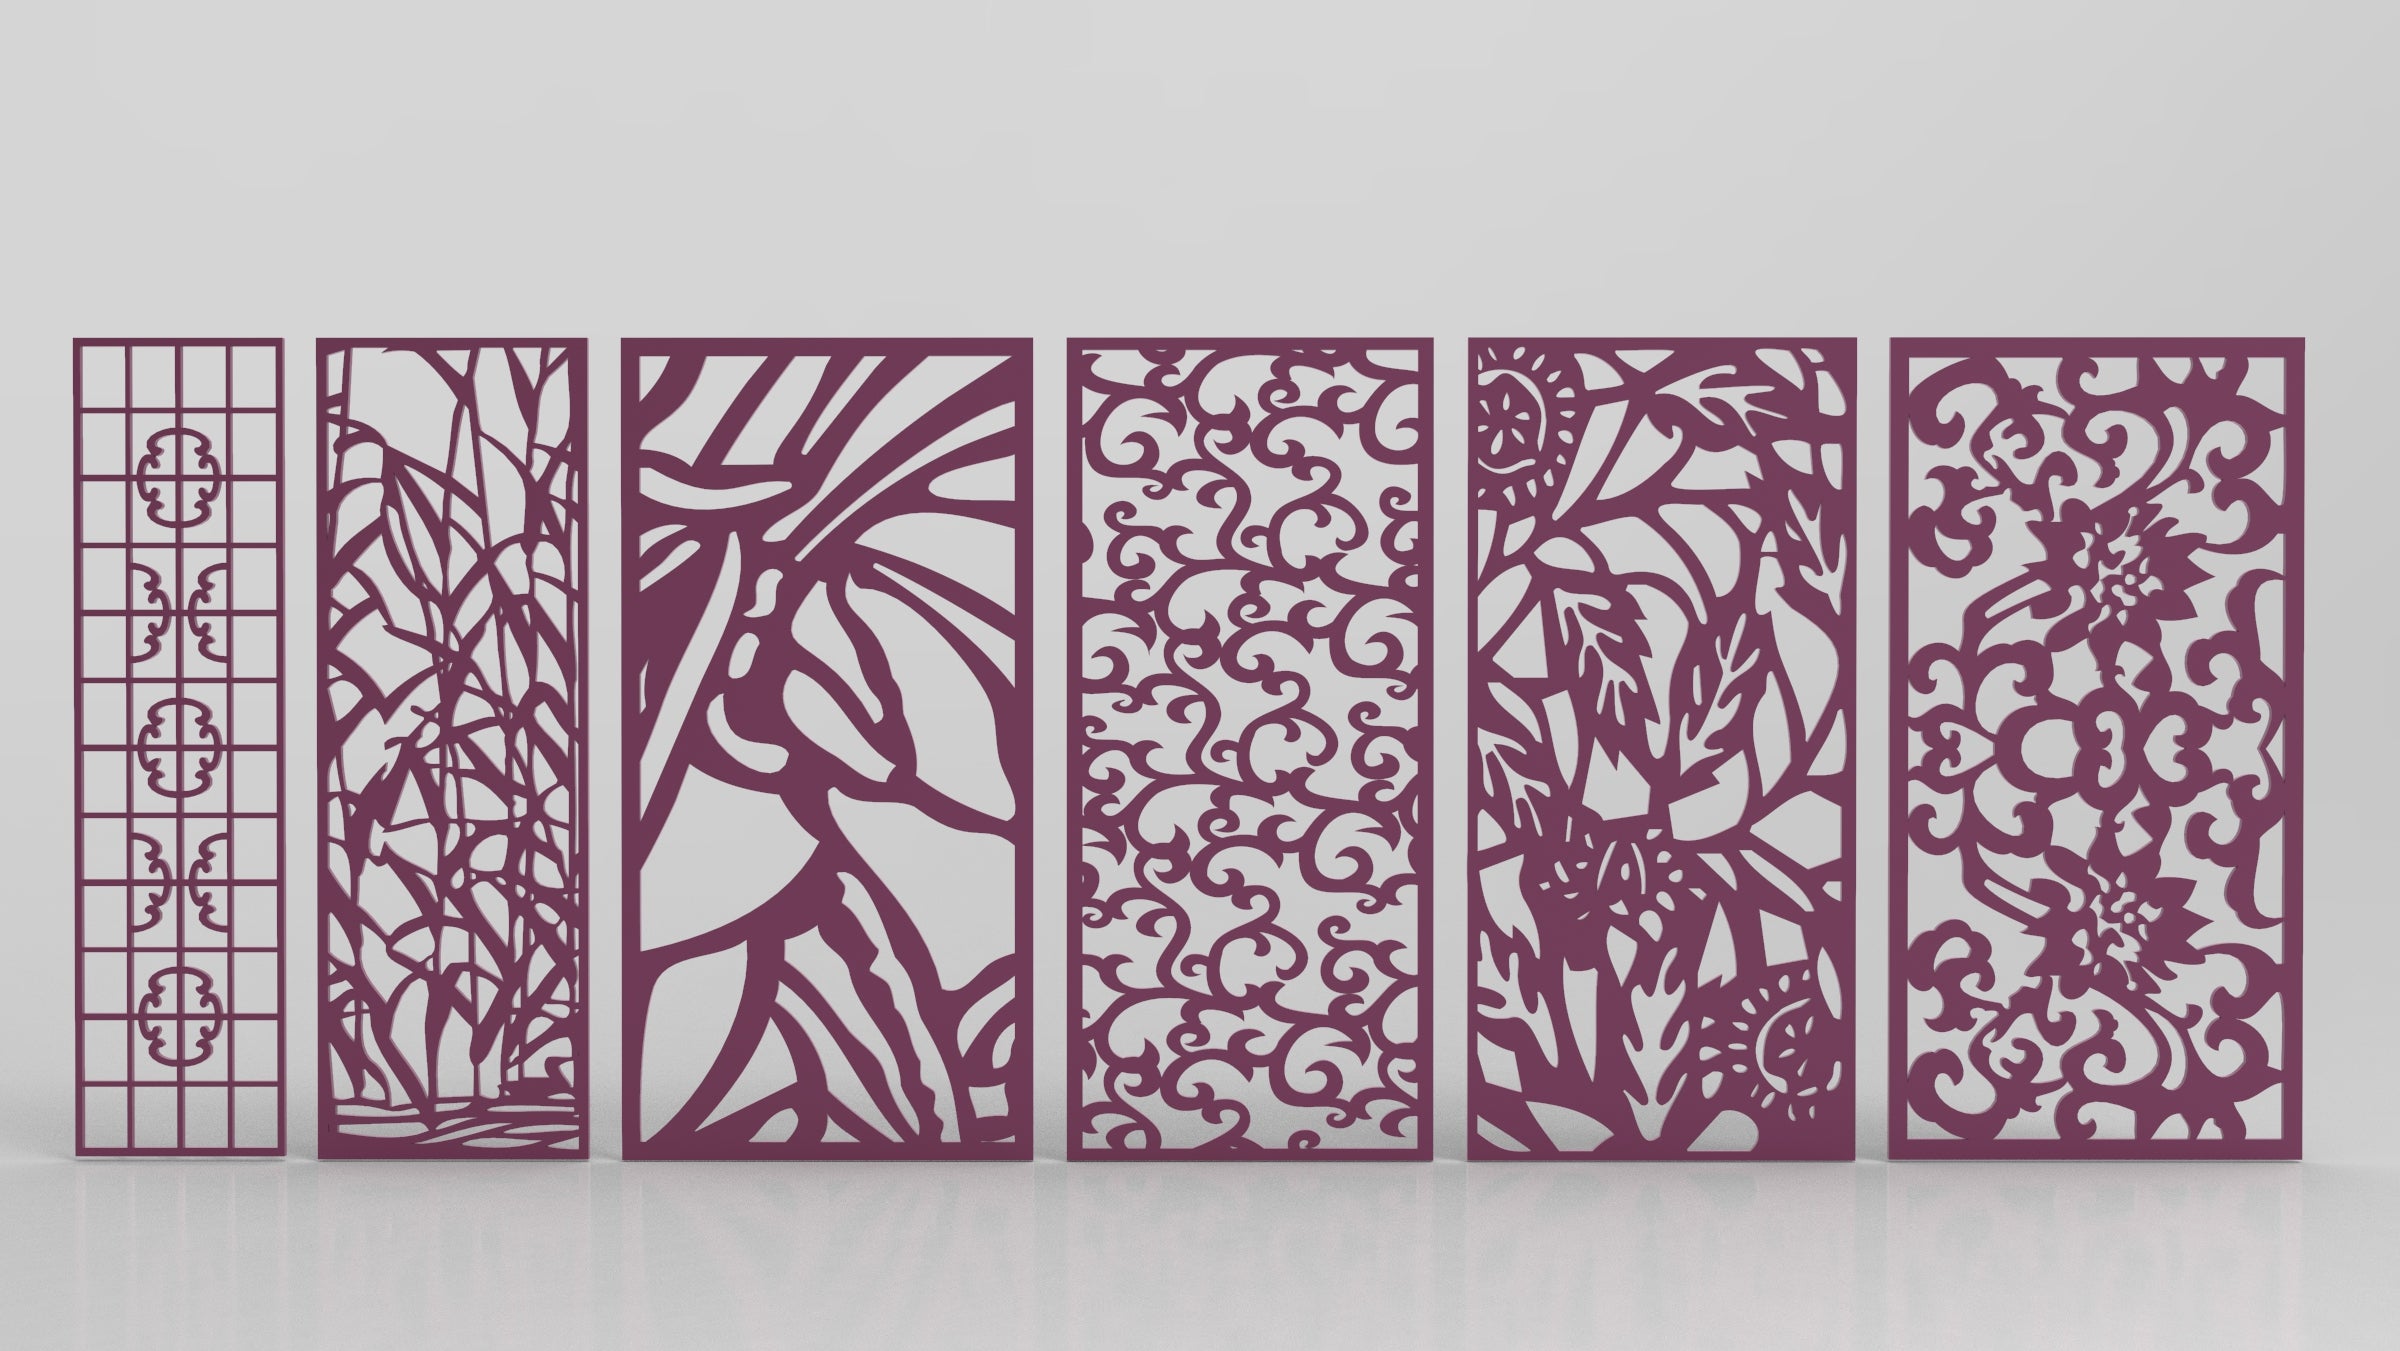 Ornaments for decorative partitions panel screen CNC Laser Cutting File | SVG, DXF, AI |#C020|